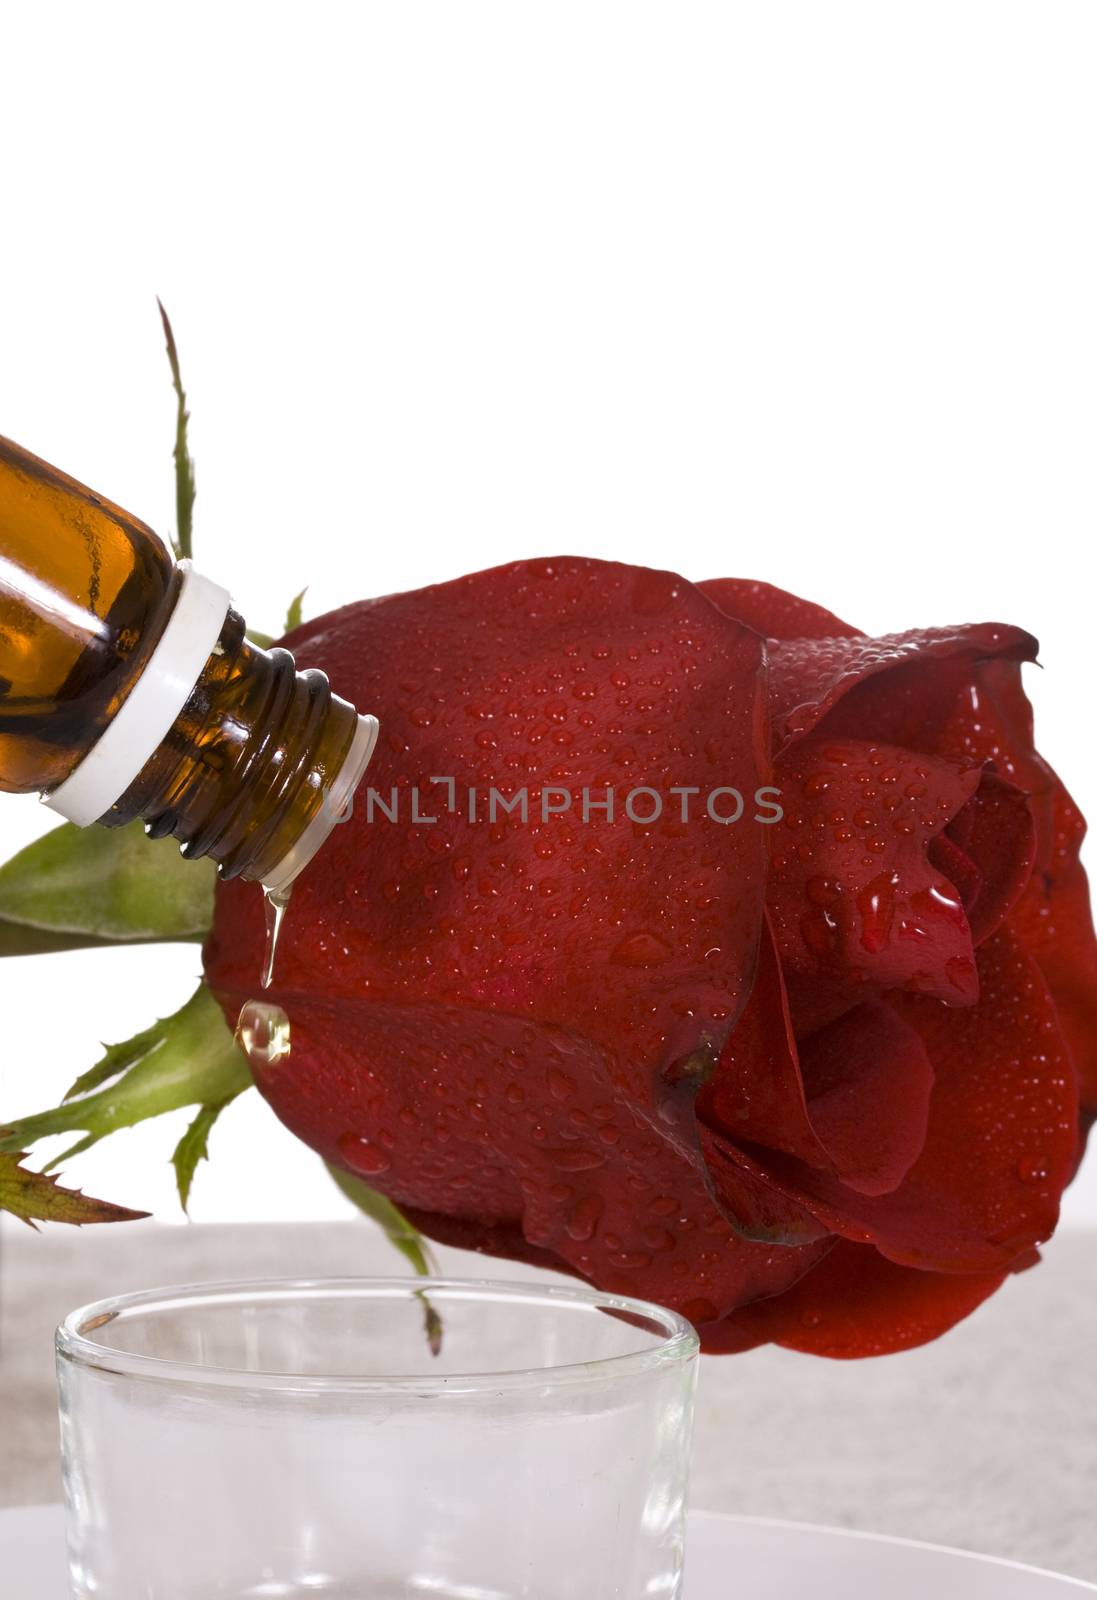 Spa essential oil dripping from the bottle and red rose